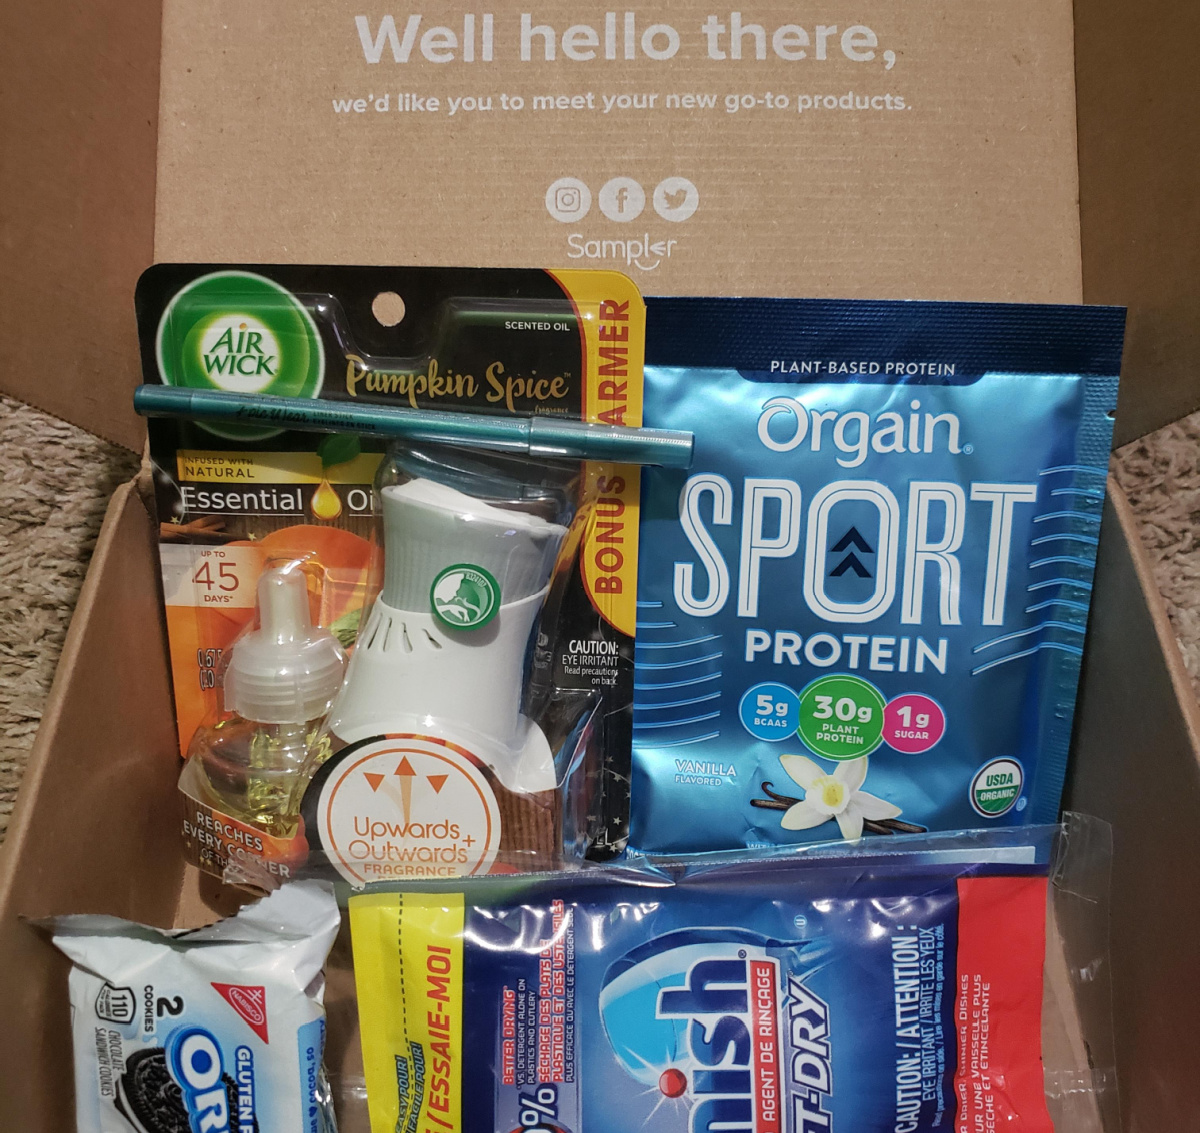 Sampler Box sent to product tester with FREE products for reviews